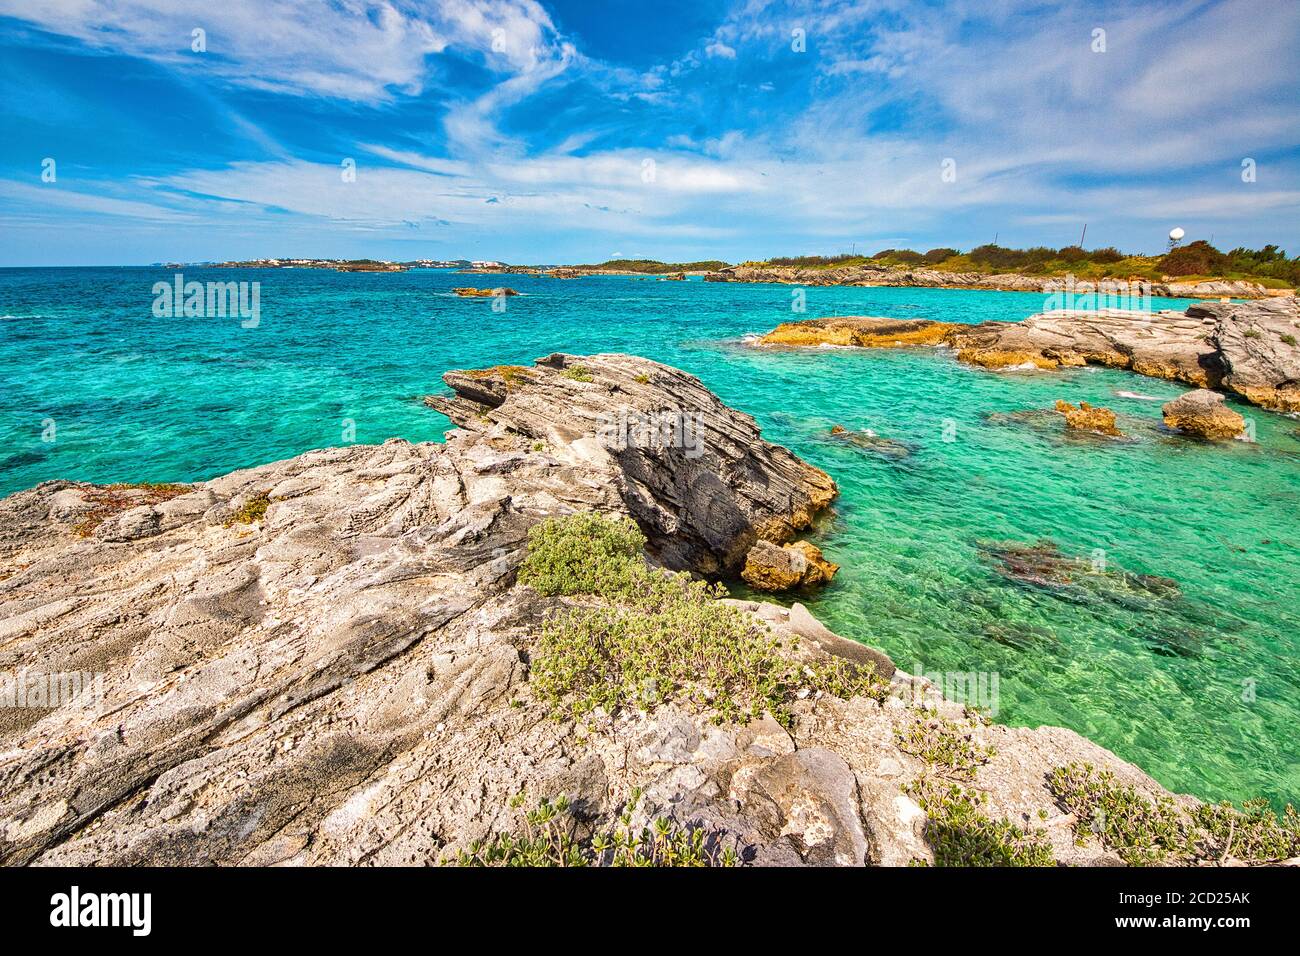 Beautiful coral reef outcrops along the coastline of Bermuda. Stock Photo